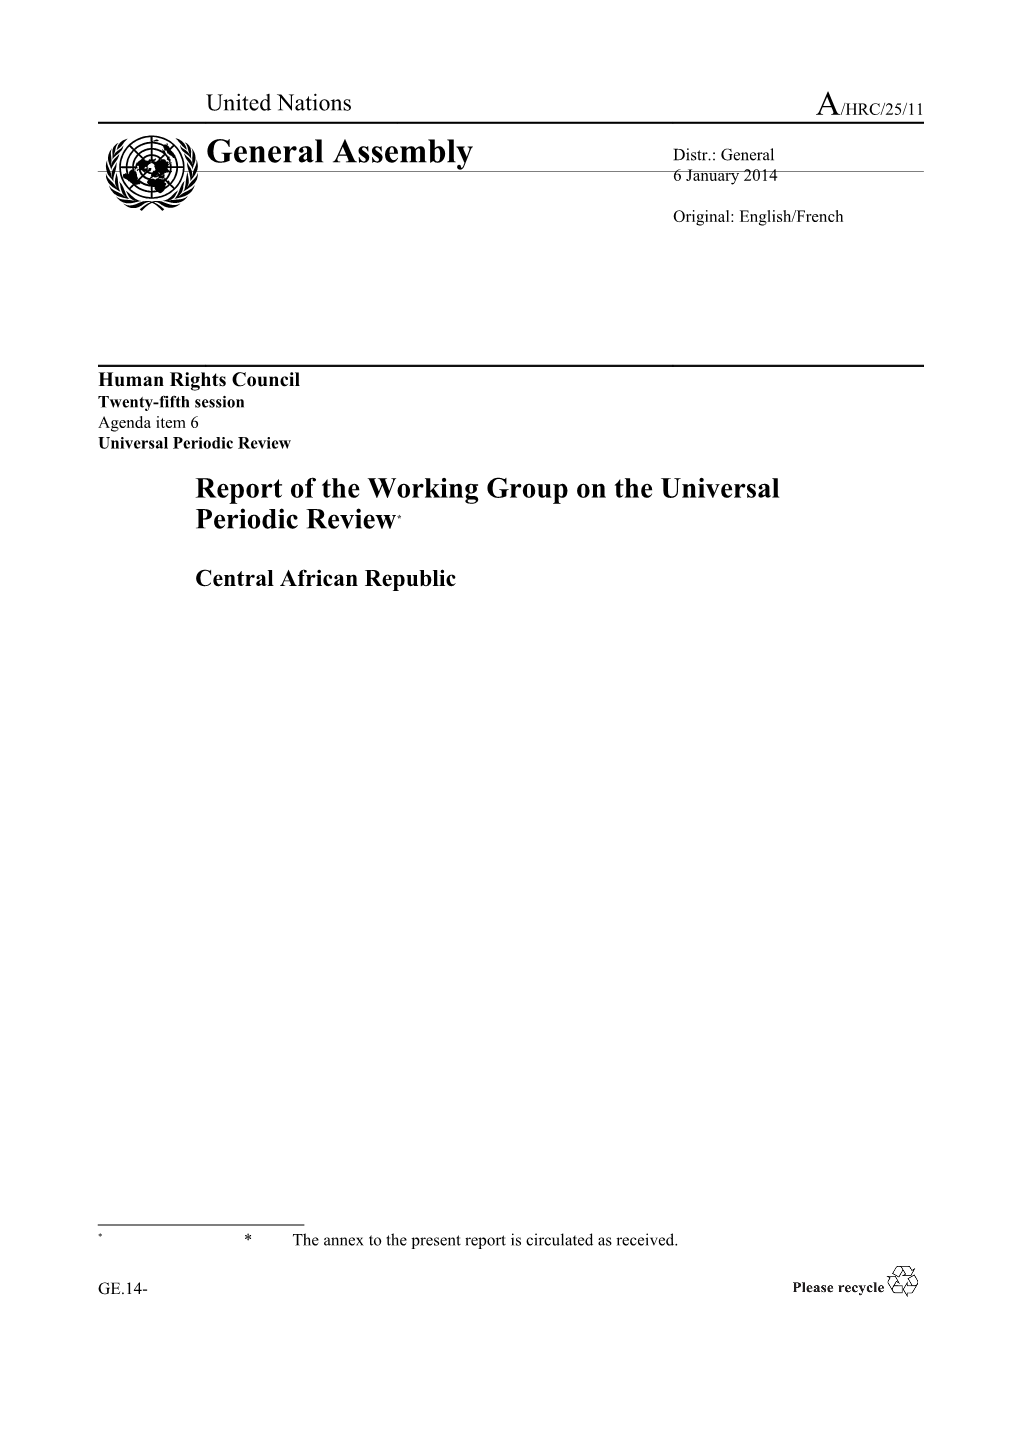 Report of the Working Group on the Universal Periodic Review - Central African Republic